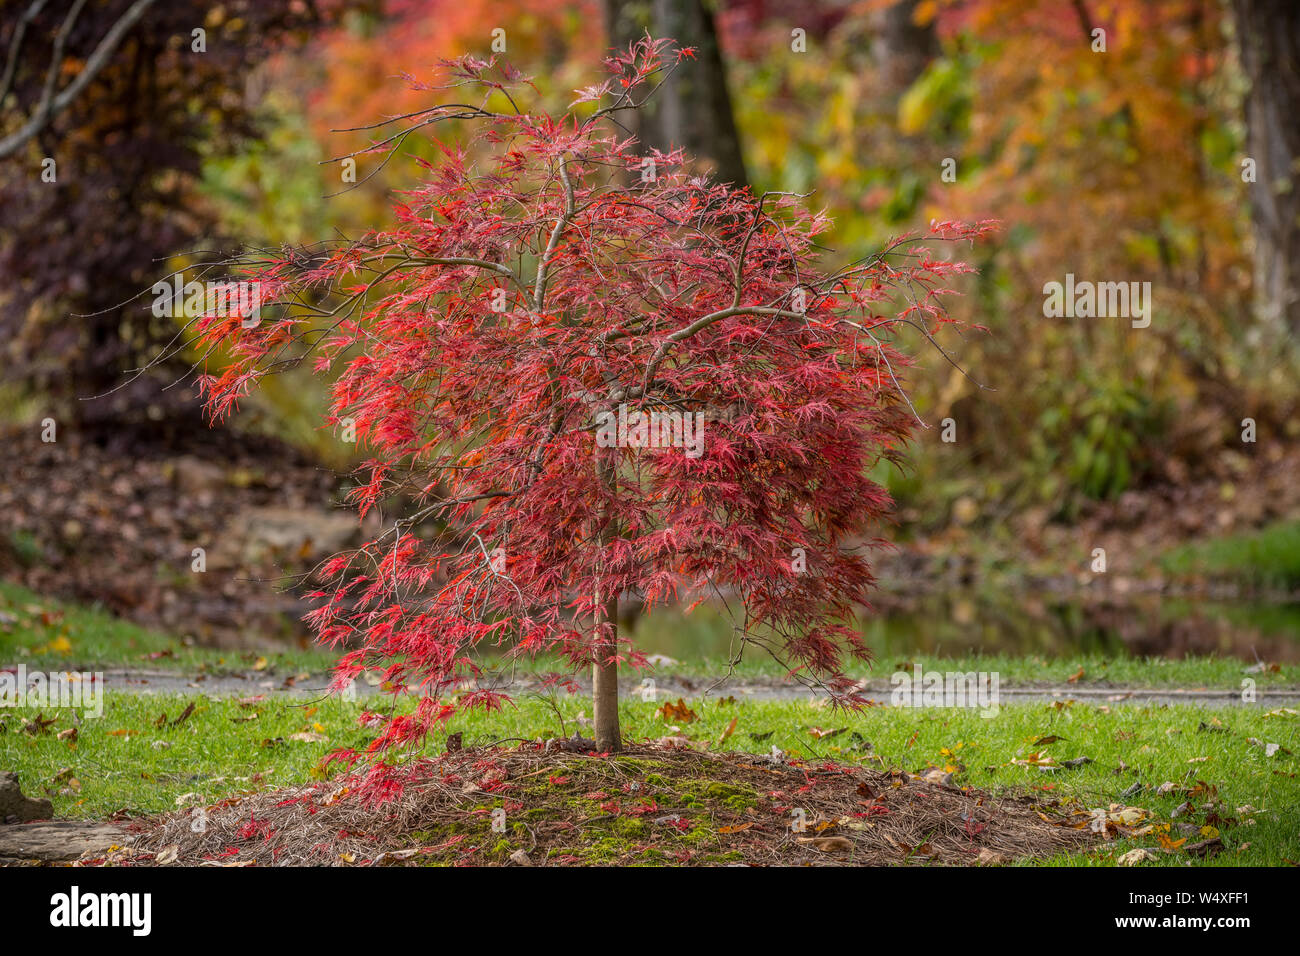 Small bright red ornamental japanese maple tree up close in autumn with other fall colors in the background Stock Photo